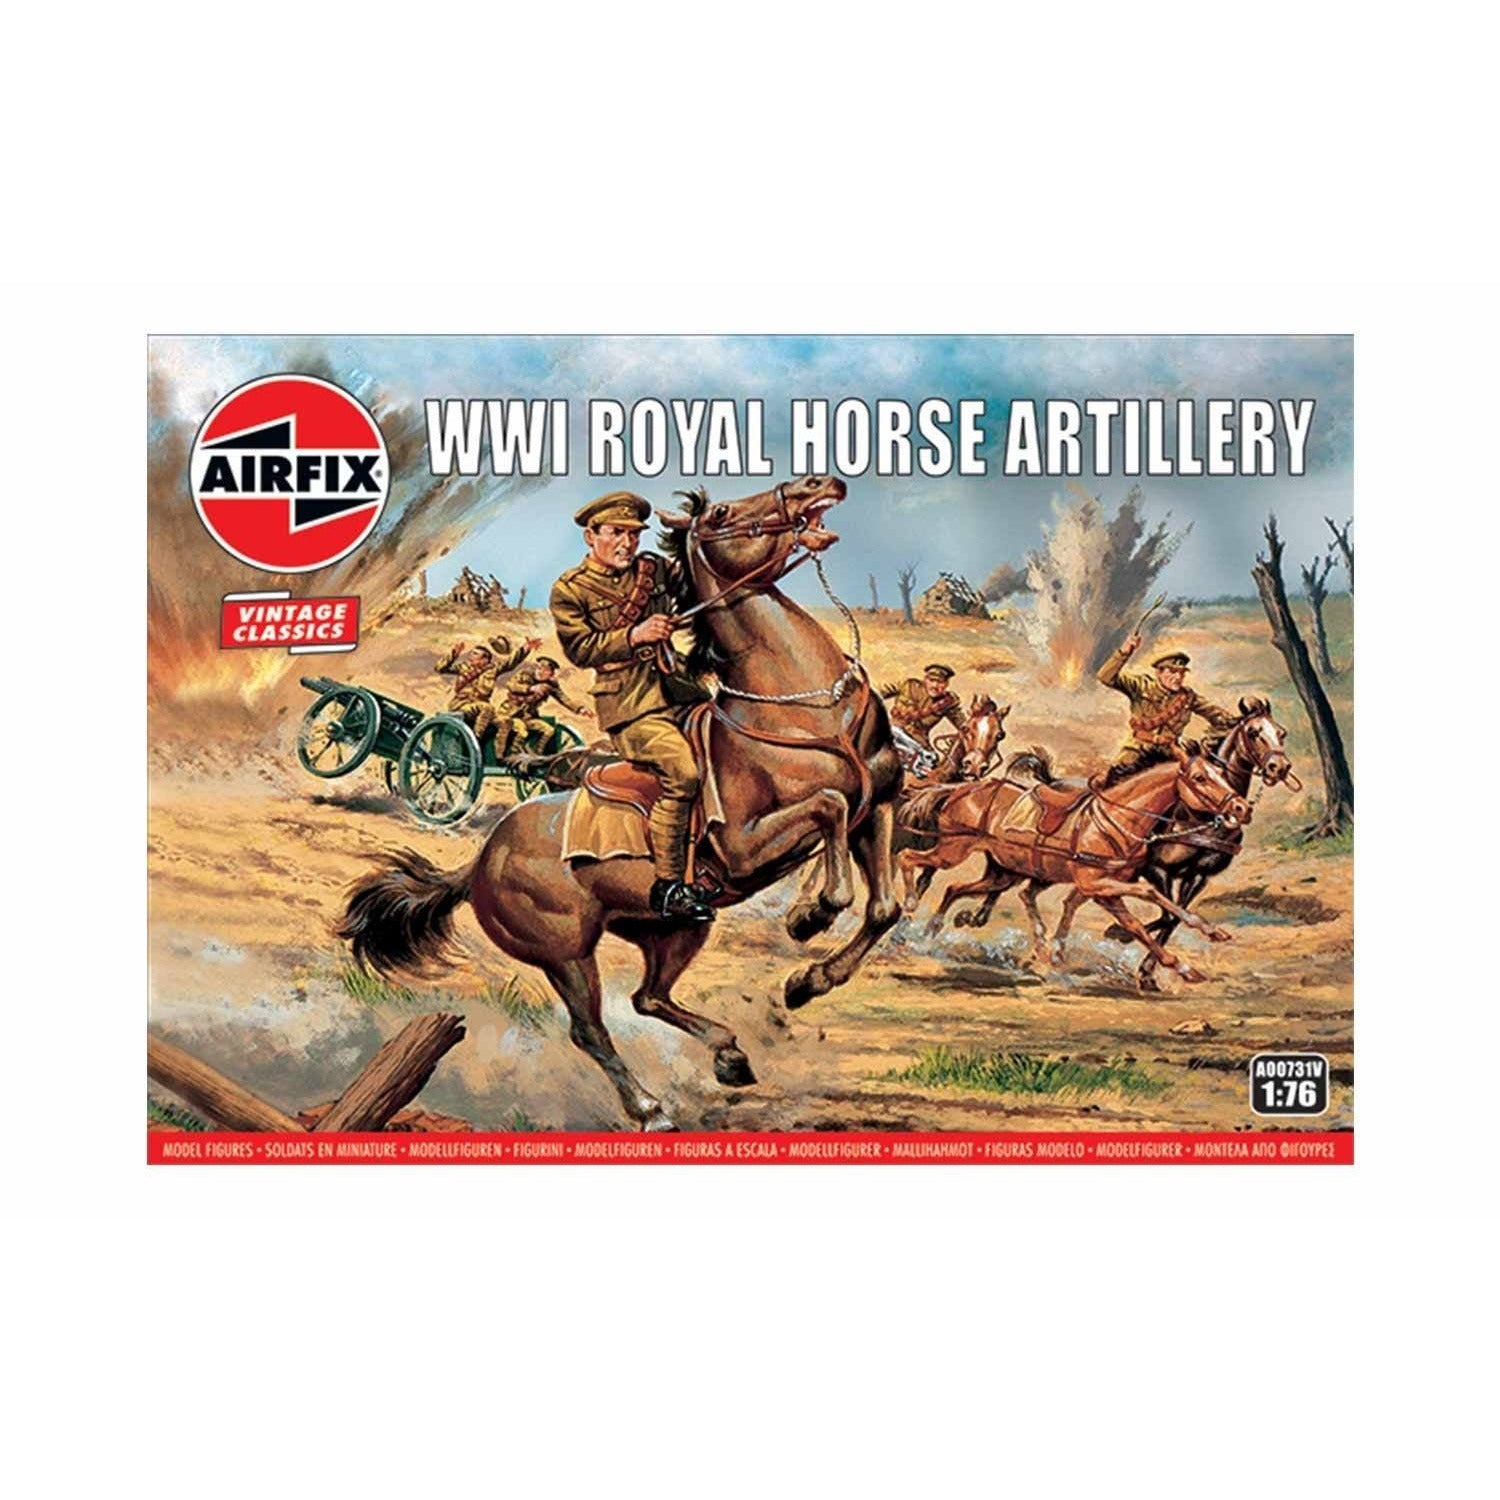 WWI Royal Horse Artillery 1/76 by Airfix